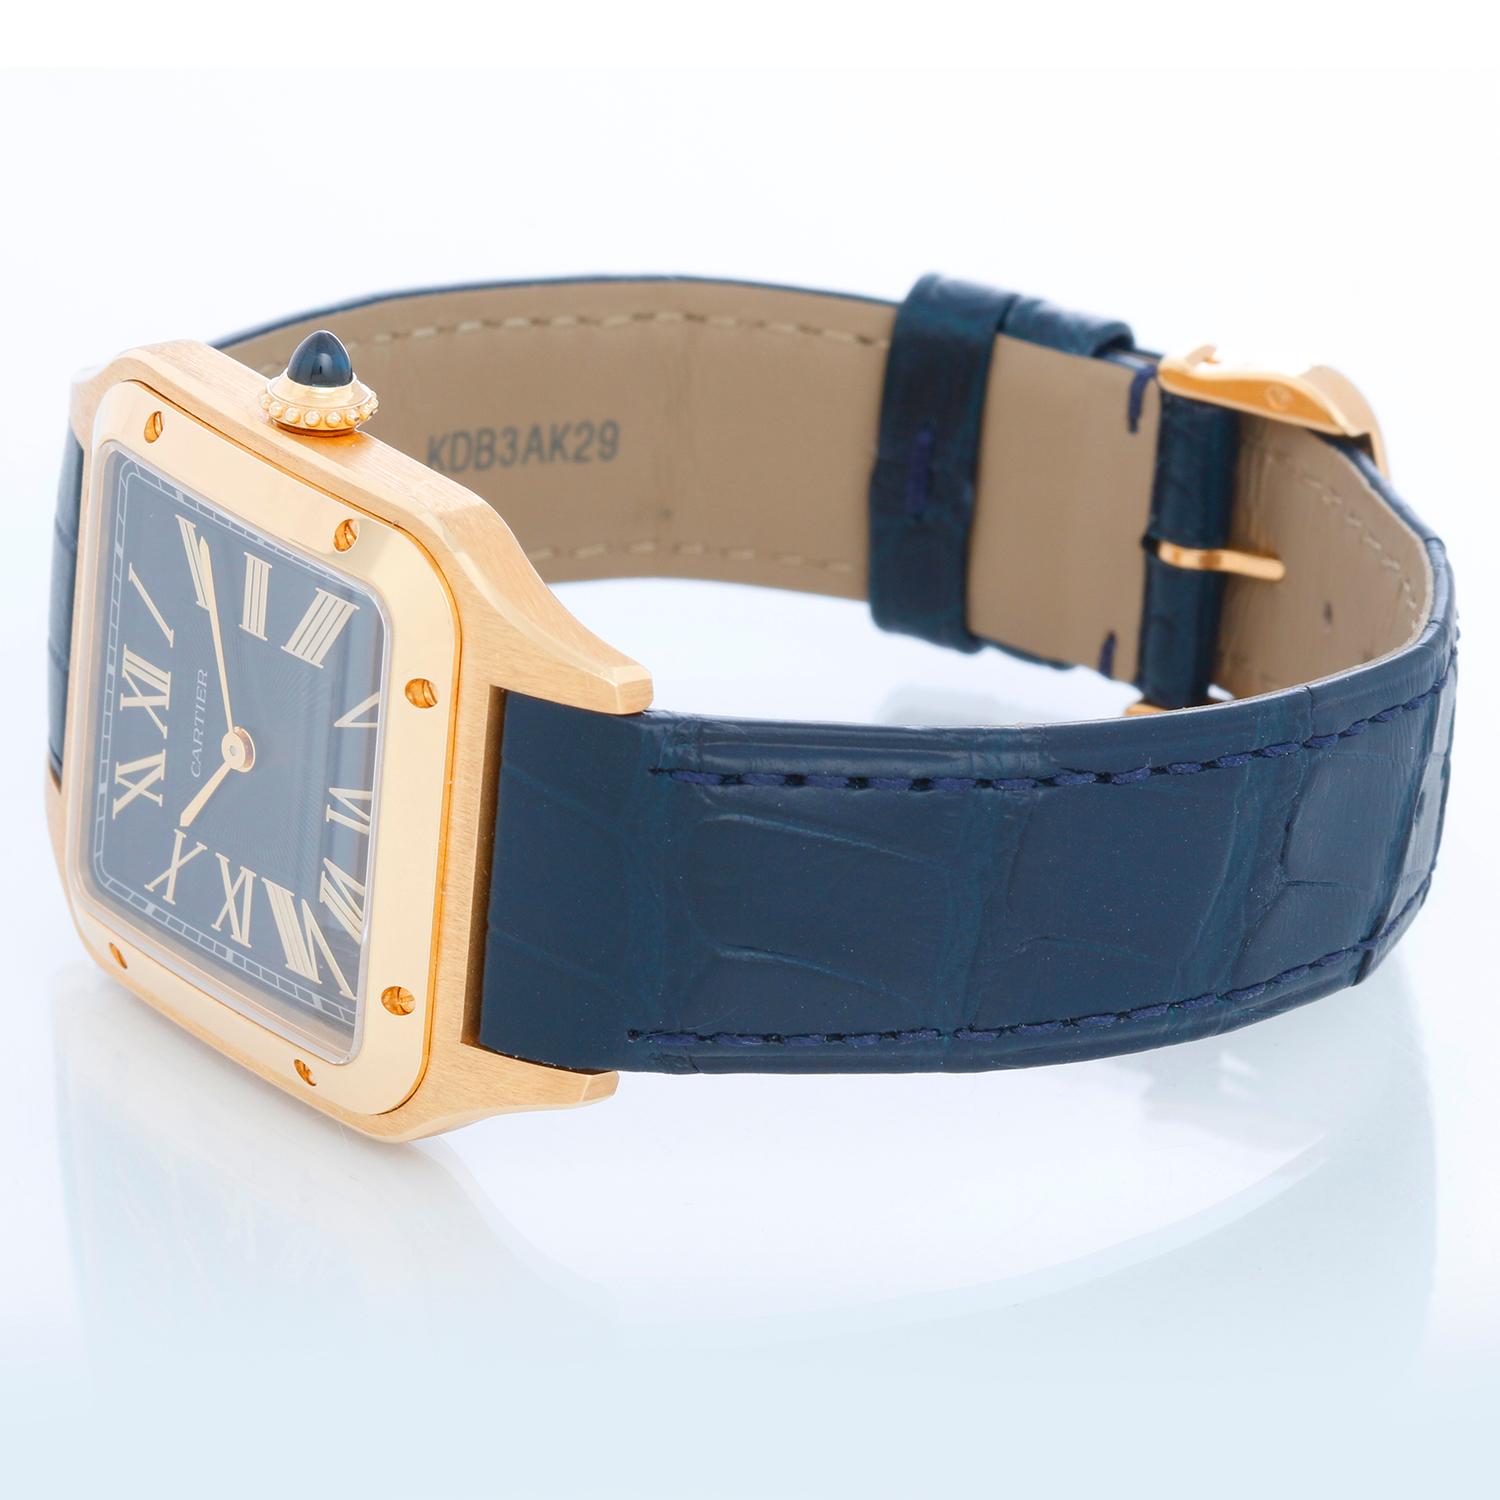 Cartier Santos Dumont 18k Yellow Gold WGSA0077 4532 - Quartz. 18k yellow gold square case (31 mm x 42 mm). Blue  Dial with Roman numerals. Blue Cartier alligator strap with 18k yellow gold tang buckle. Pre-owned with Cartier box, books and card.